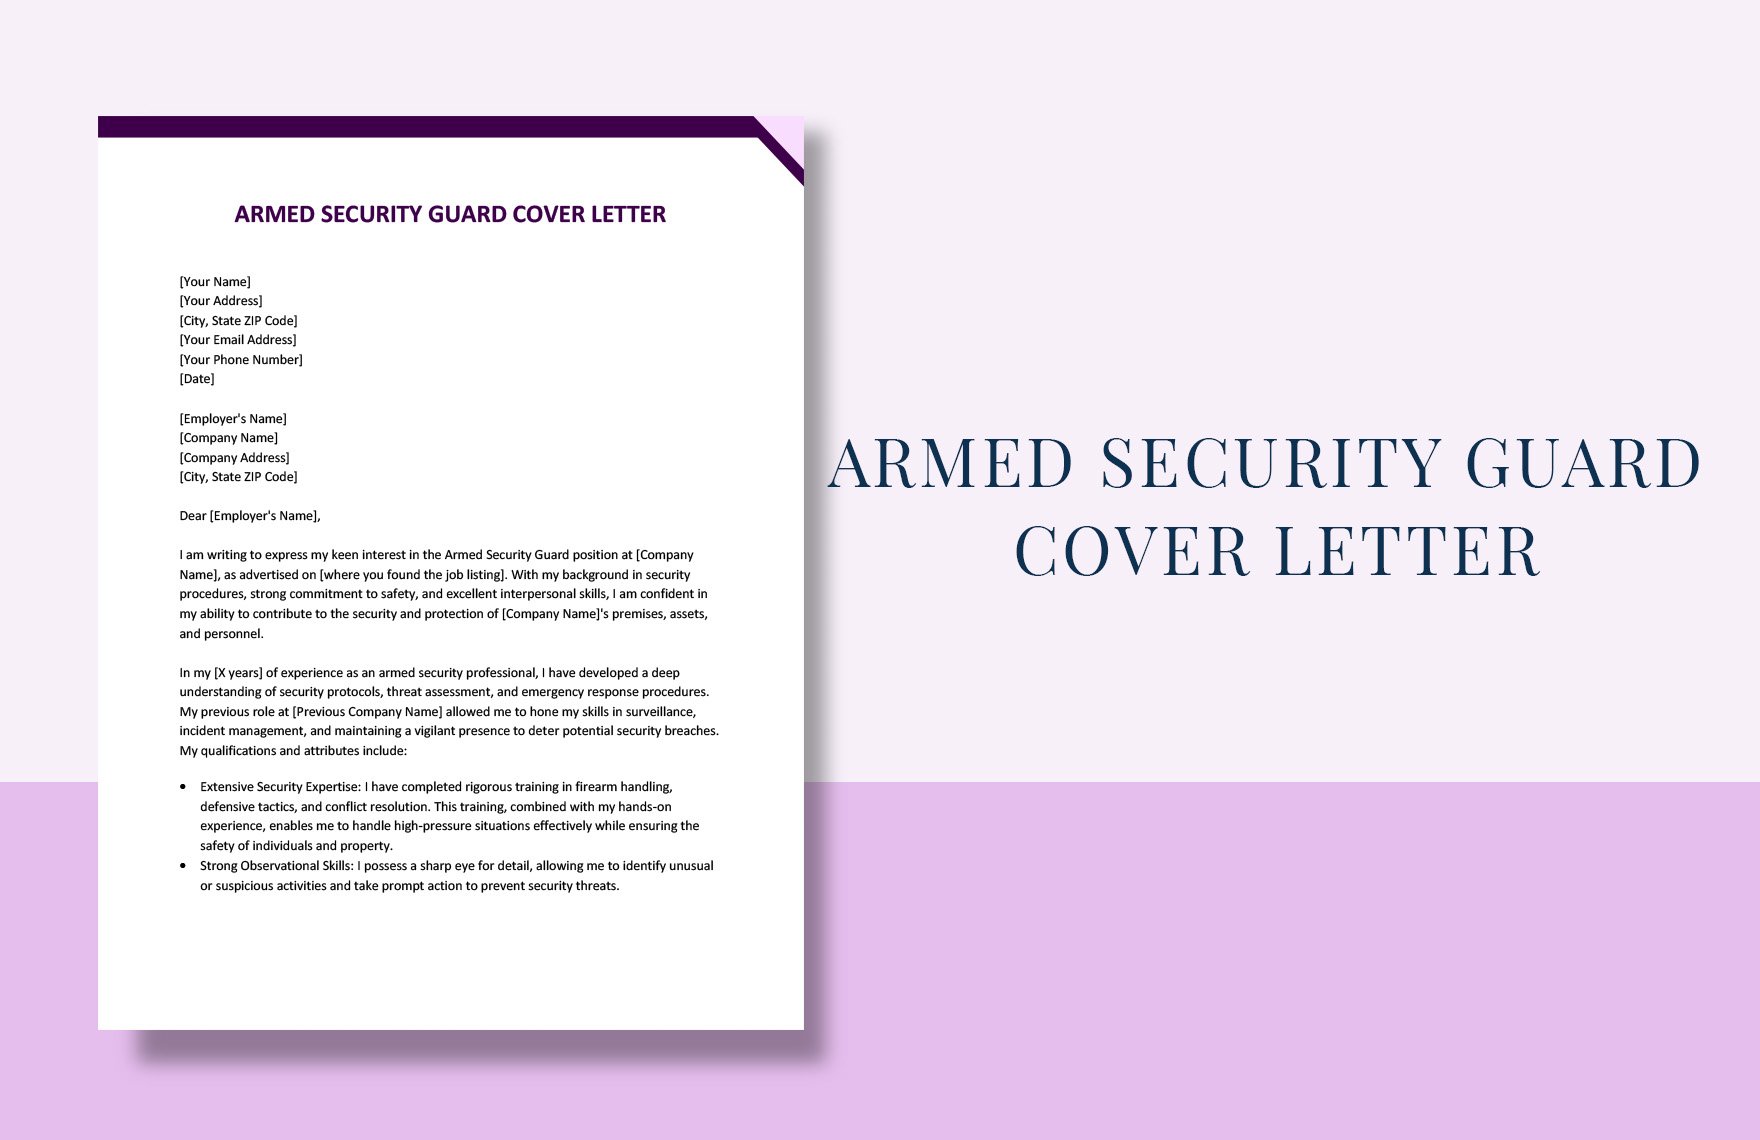 Armed Security Guard Cover Letter